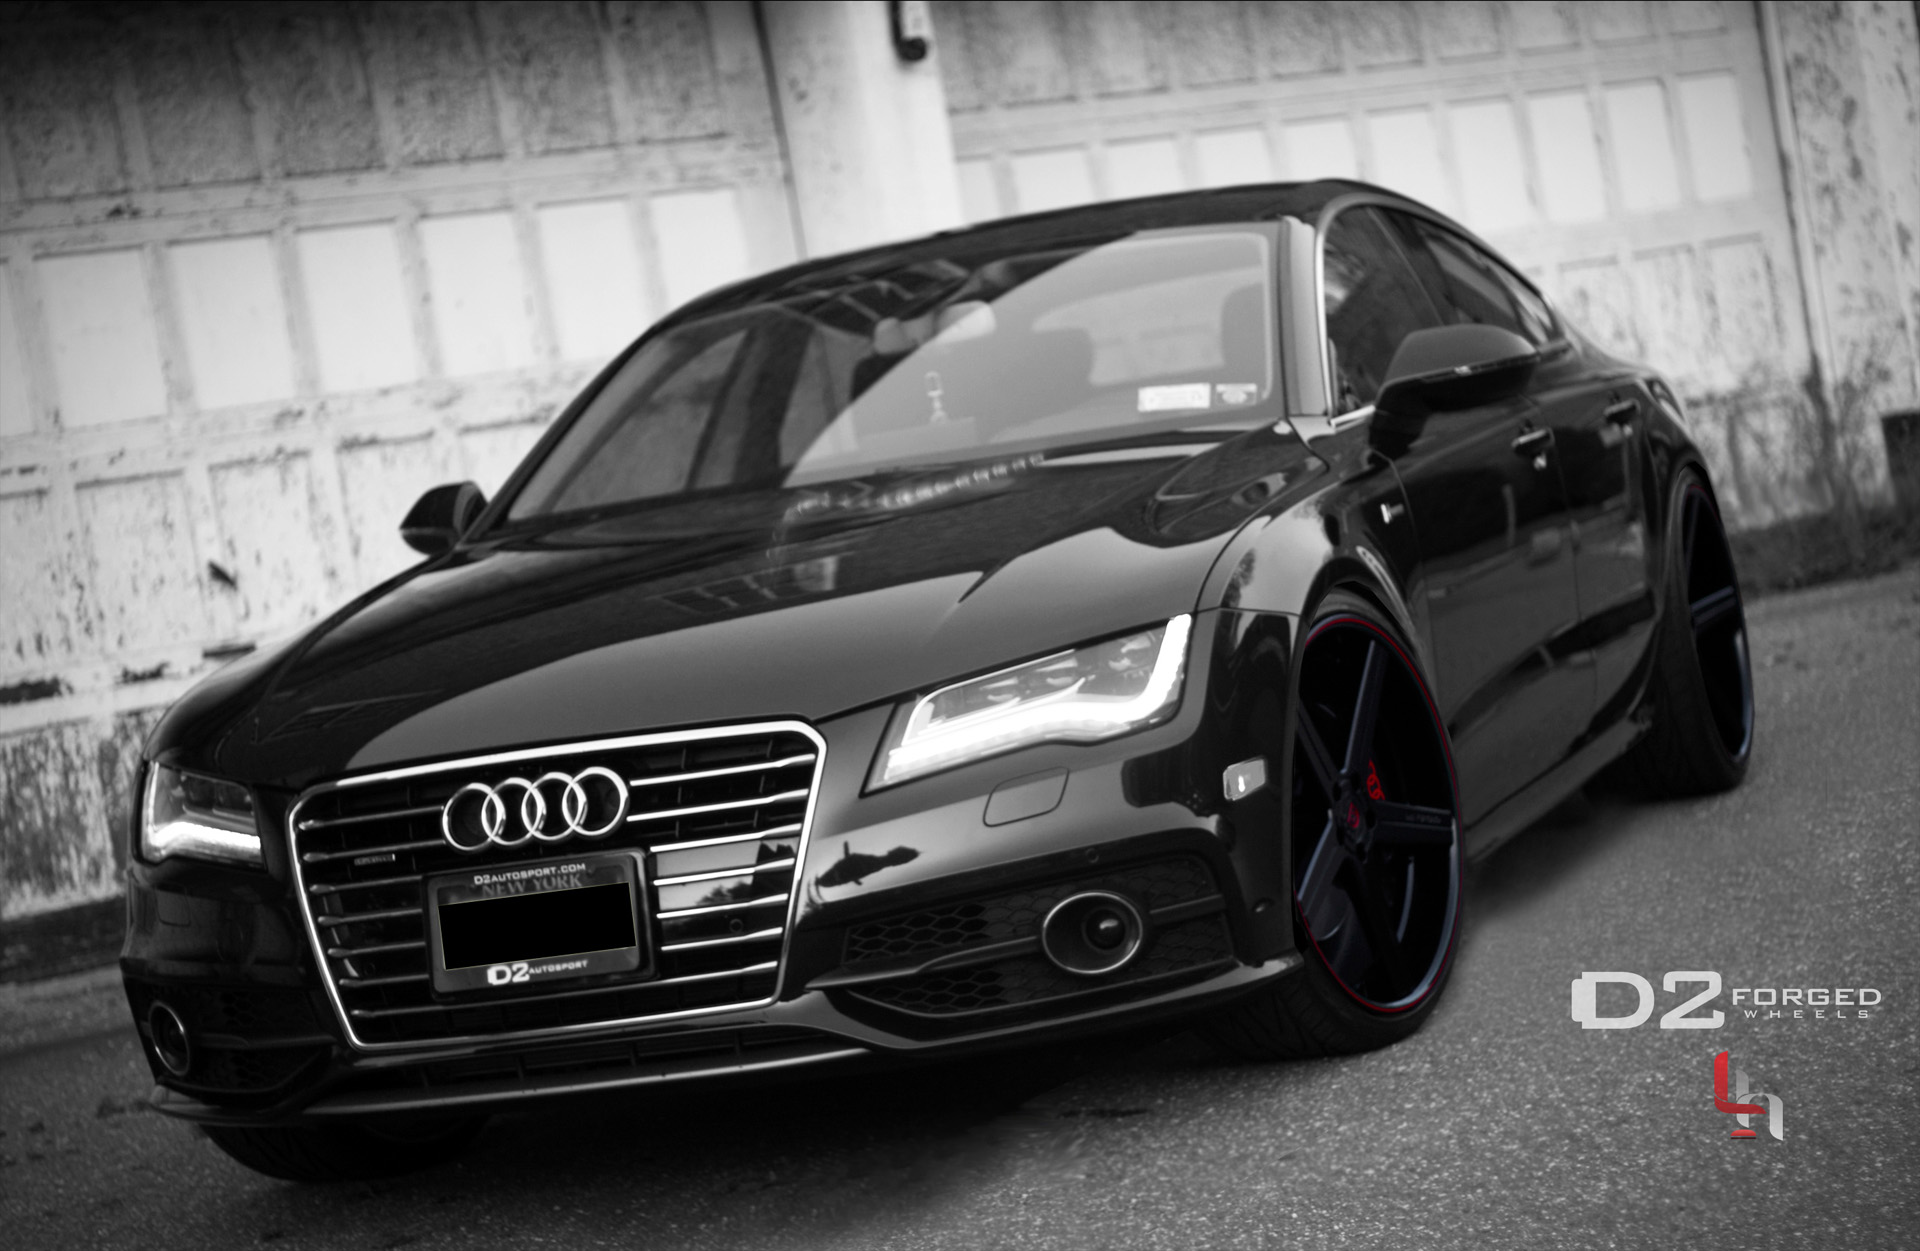 Audi A7 Blacked Out Wallpaper